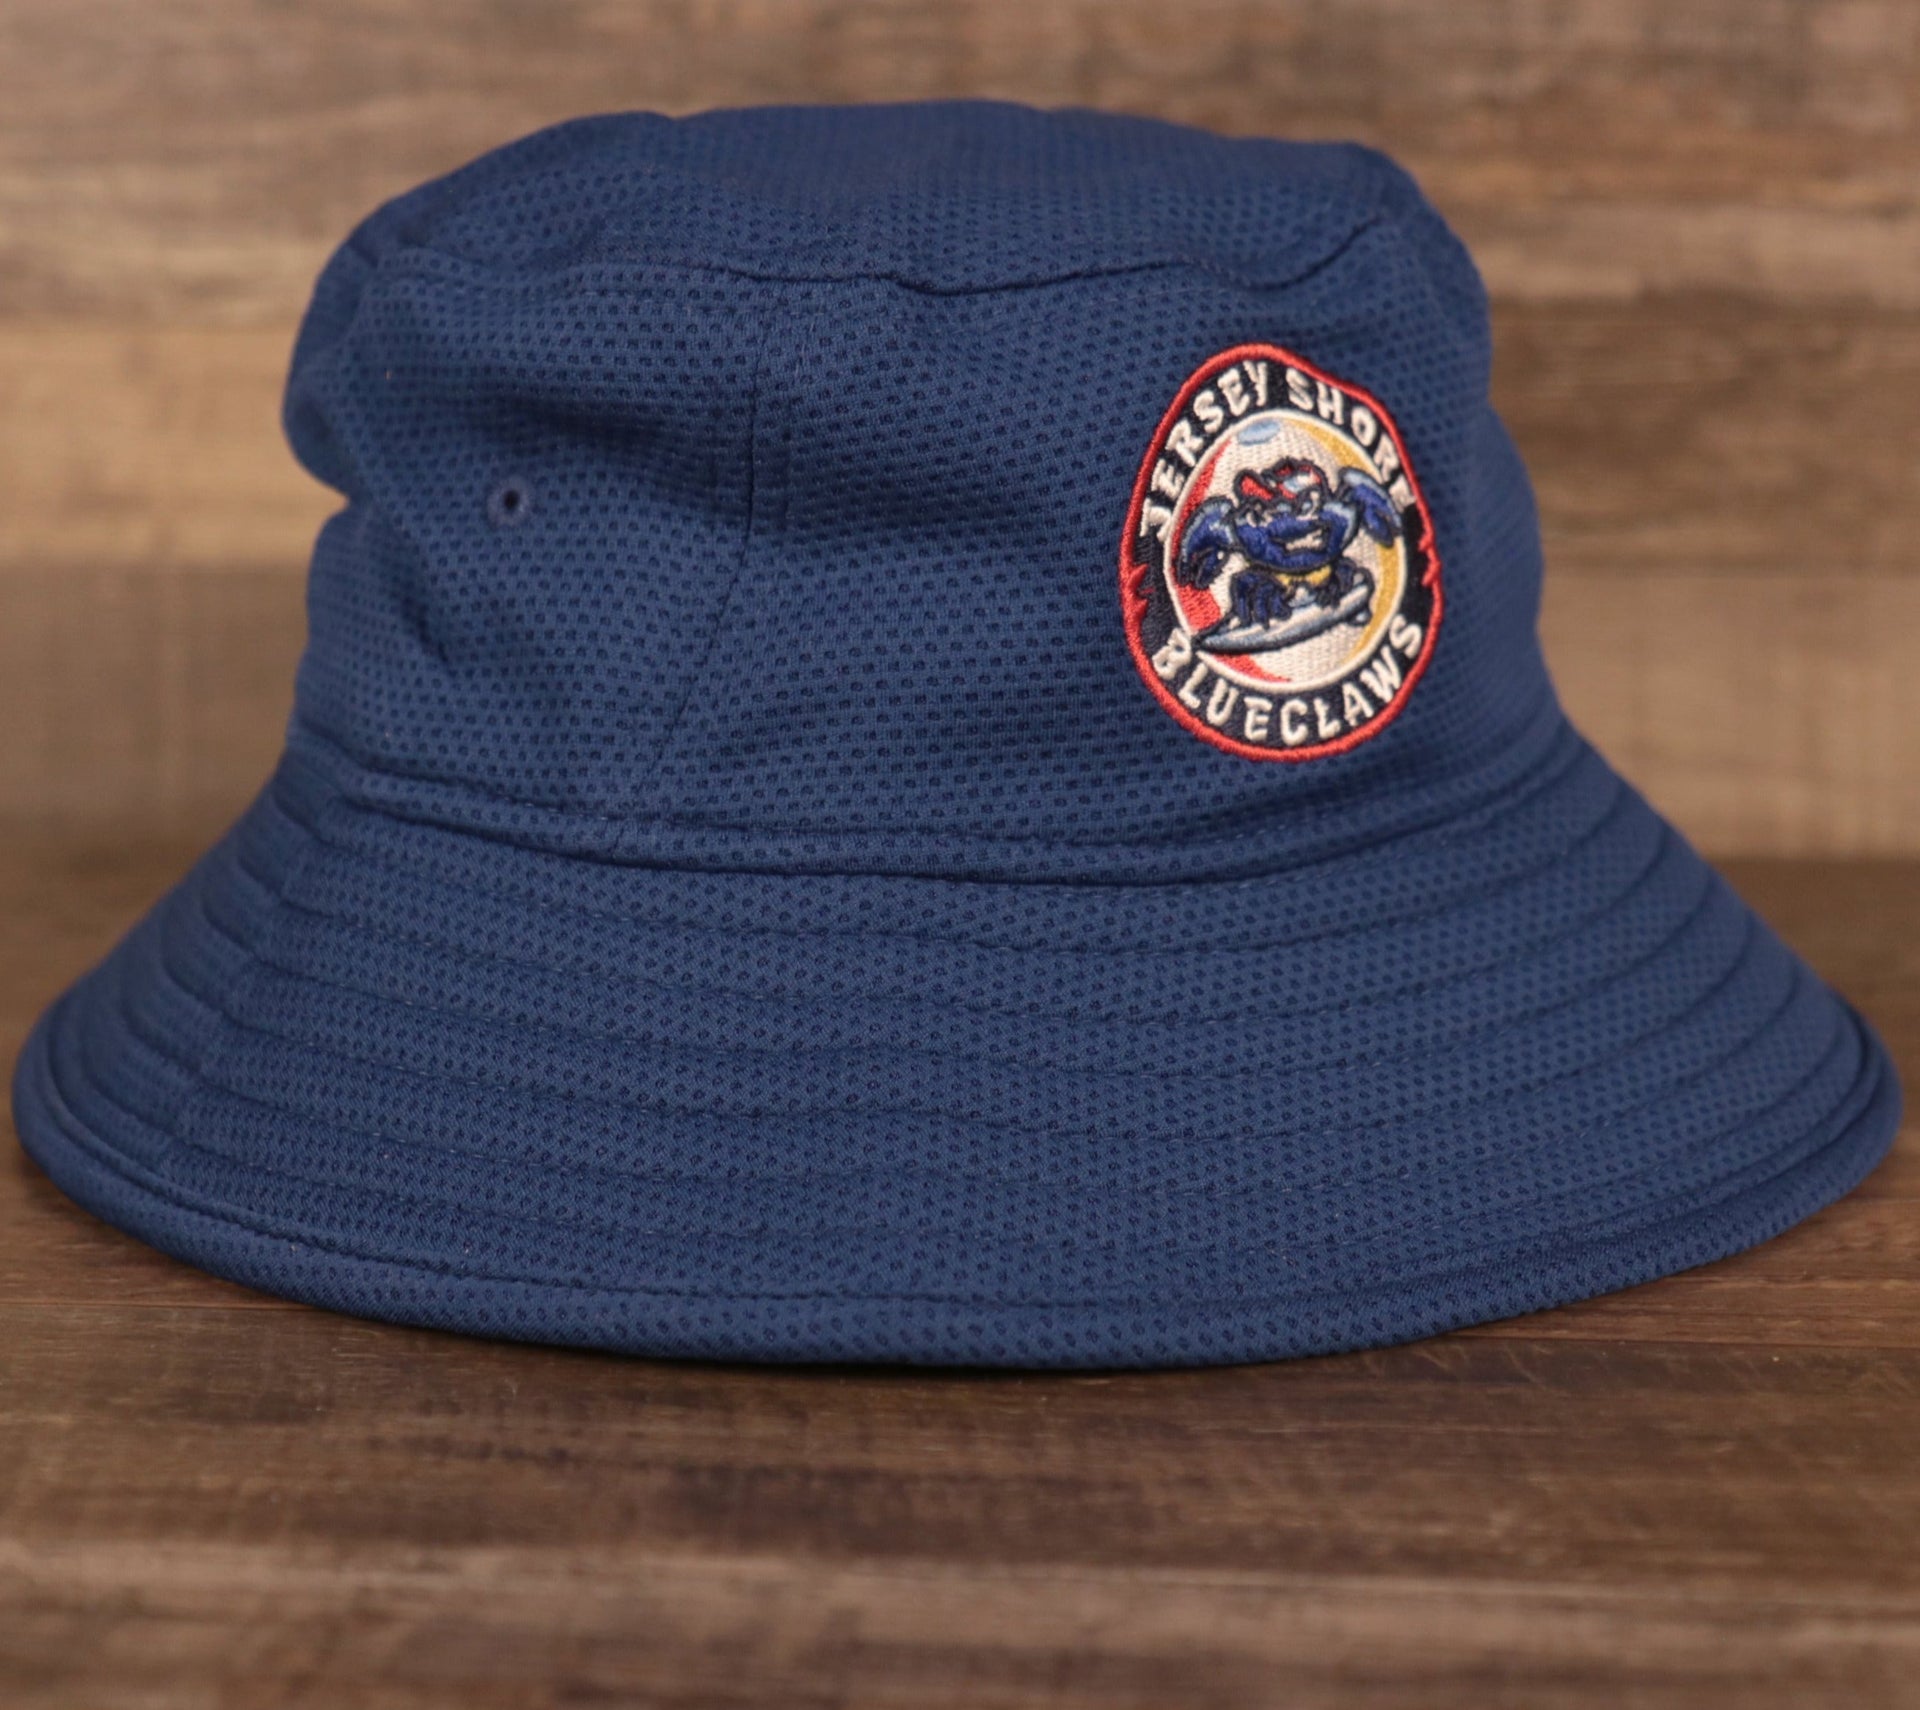 The Jersey Shore BlueClaws bucket hat is made out of 100% polyester featuring the Jersey Shore BlueClaws logo embroidered on the front